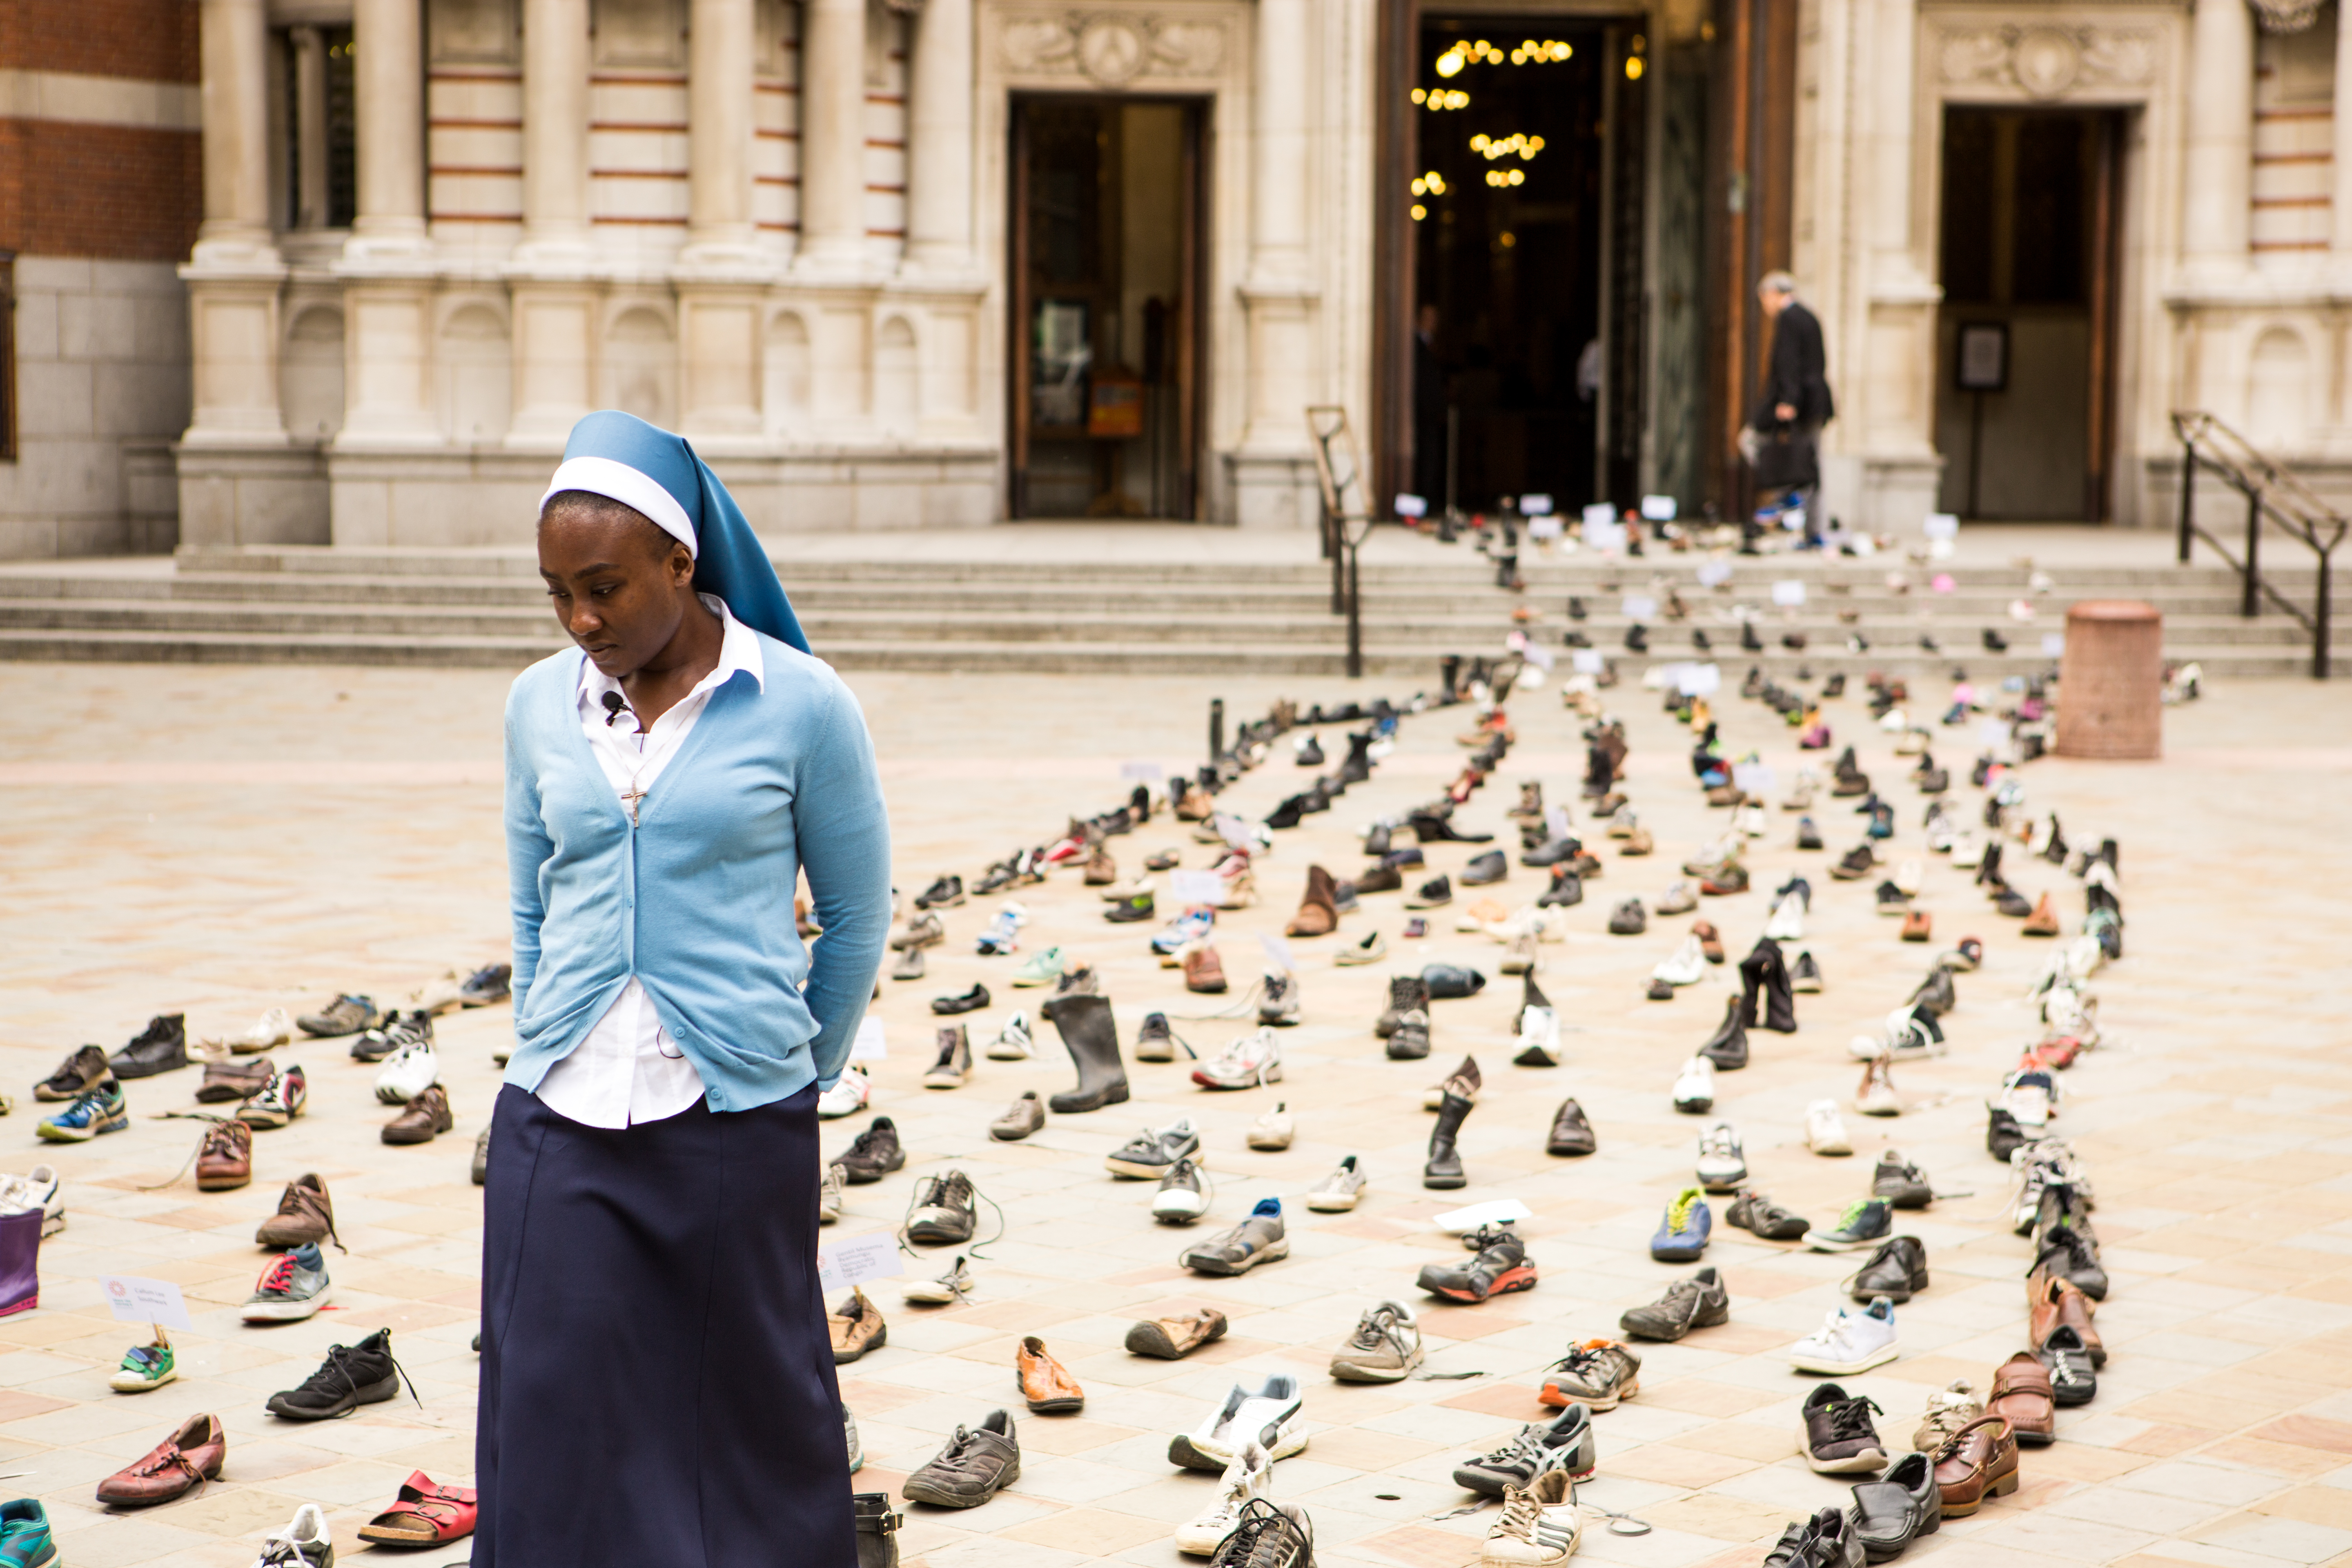 Plight of refugees illustrated by hundreds of shoes outside cathedral 